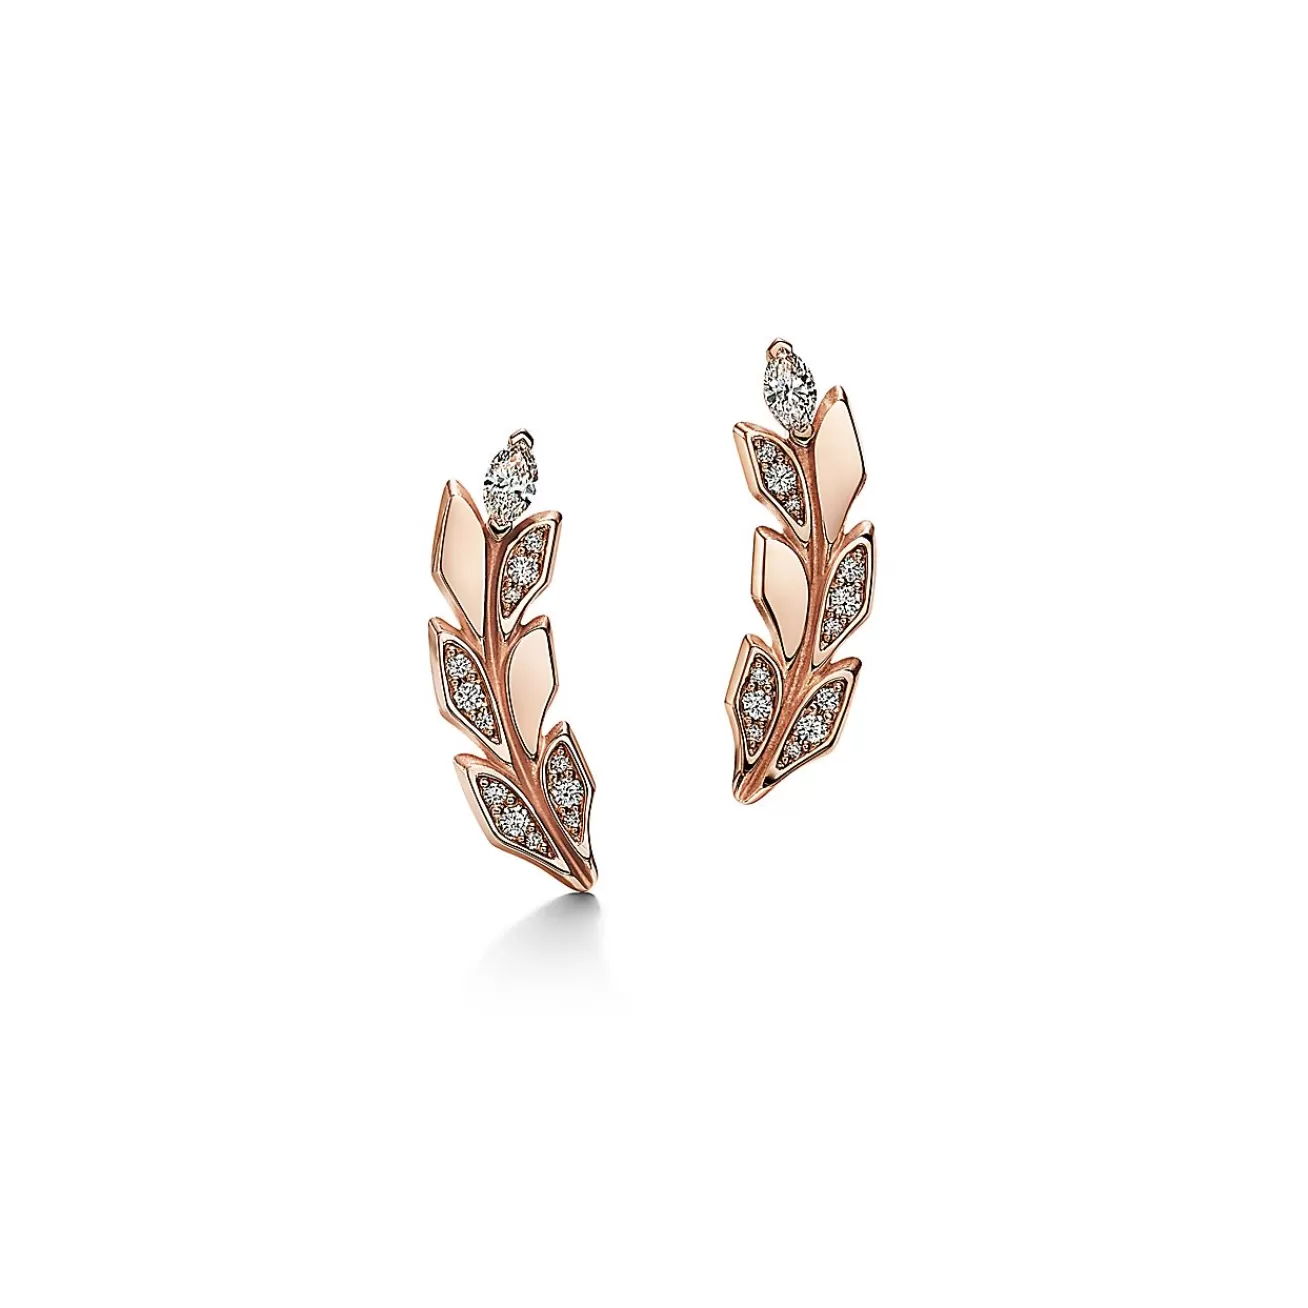 Tiffany & Co. Tiffany Victoria® Vine Climber Earrings in Rose Gold with Diamonds | ^ Earrings | Gifts for Her